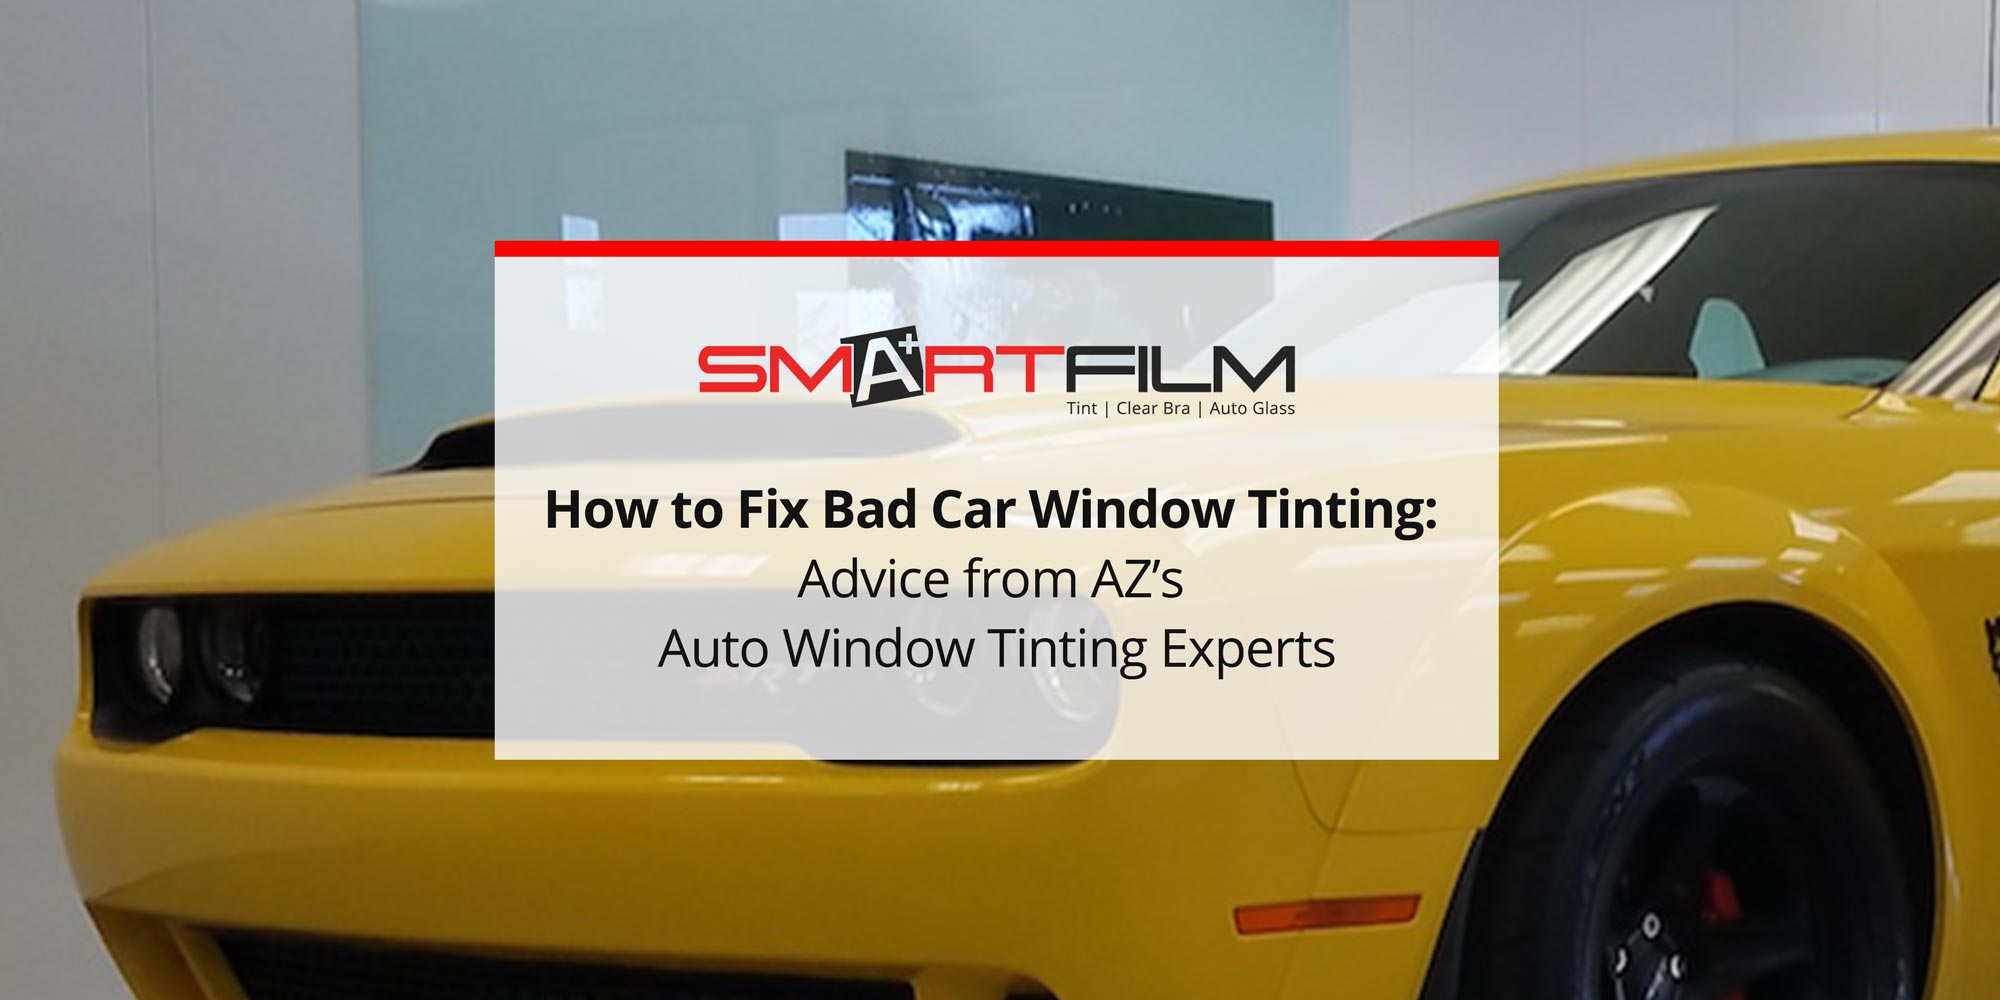 How to Fix Bad Car Window Tinting